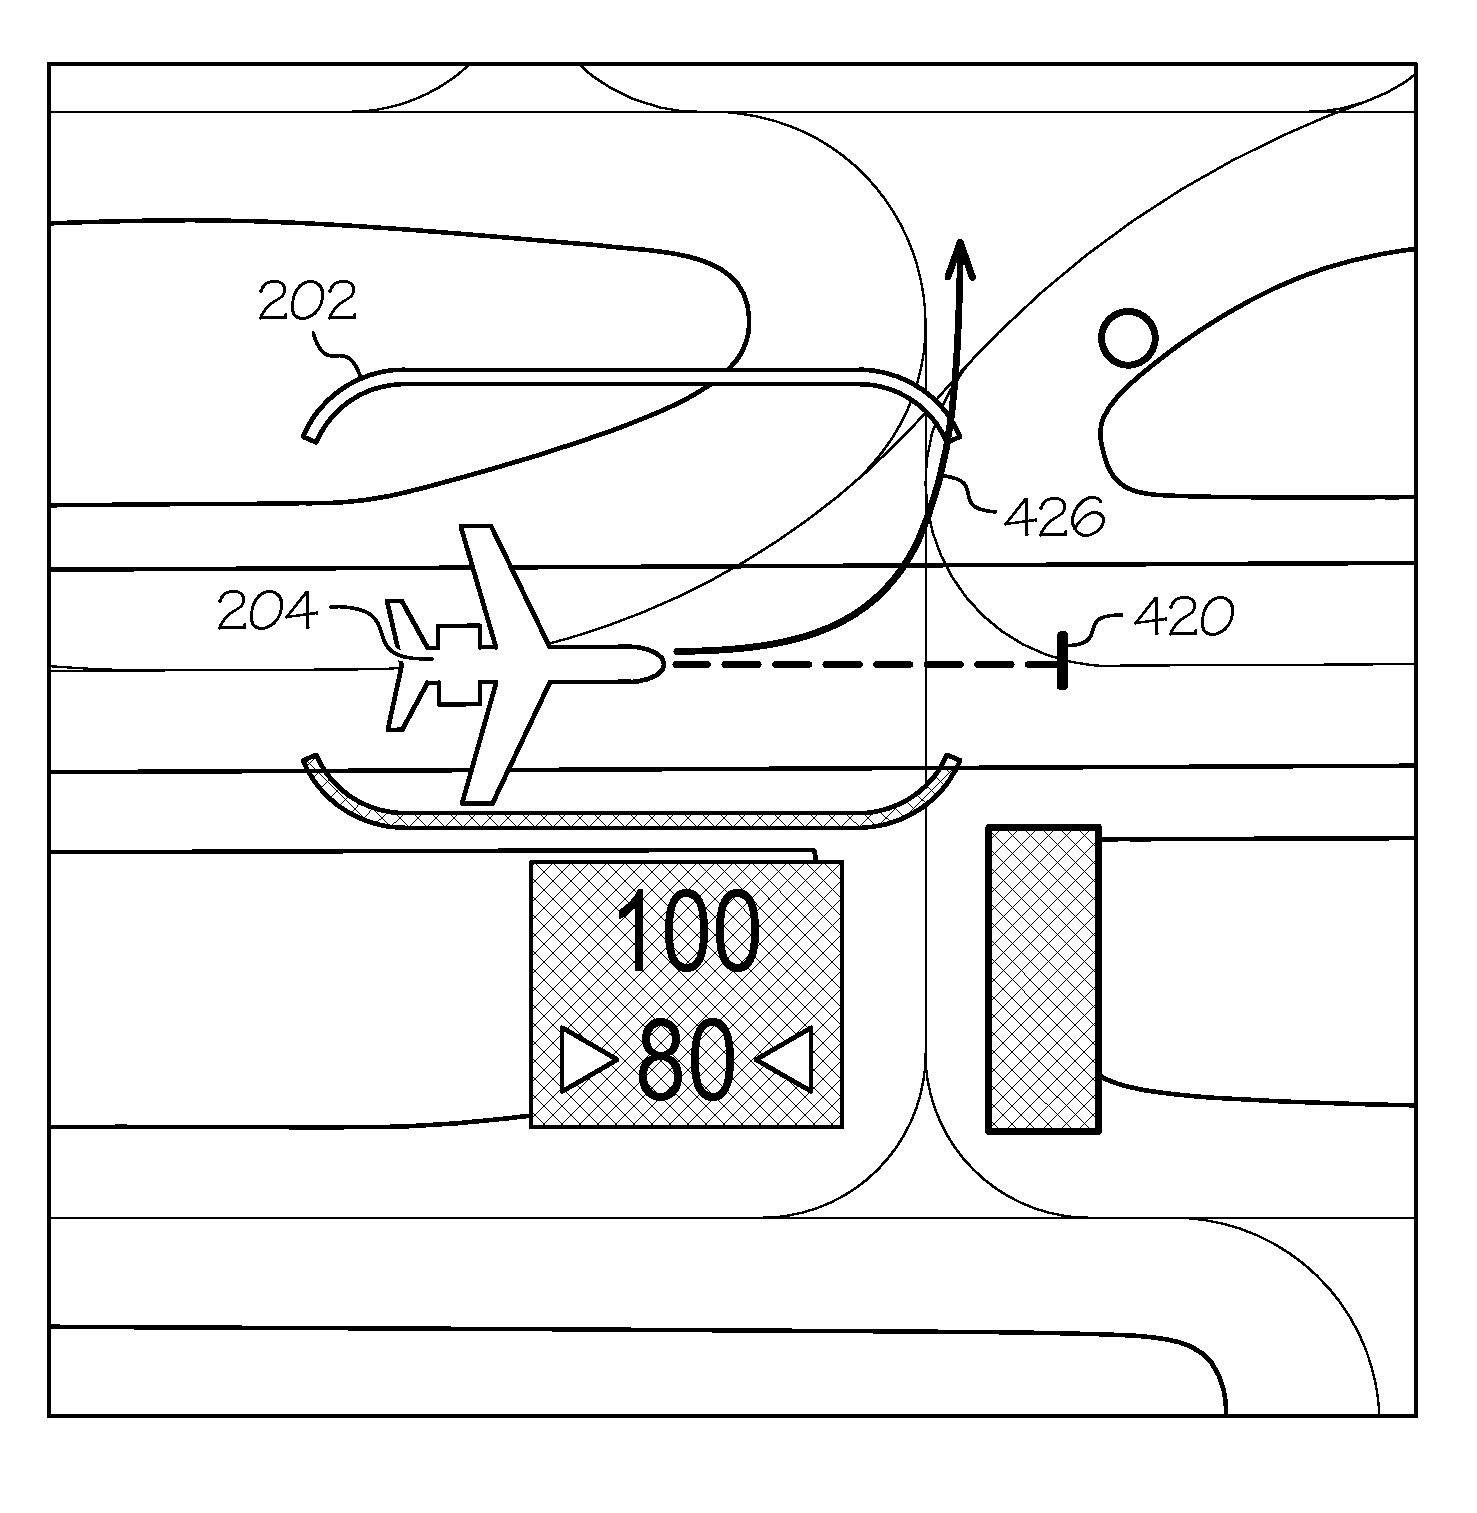 System and method for highlighting an area encompassing an aircraft that is free of hazards